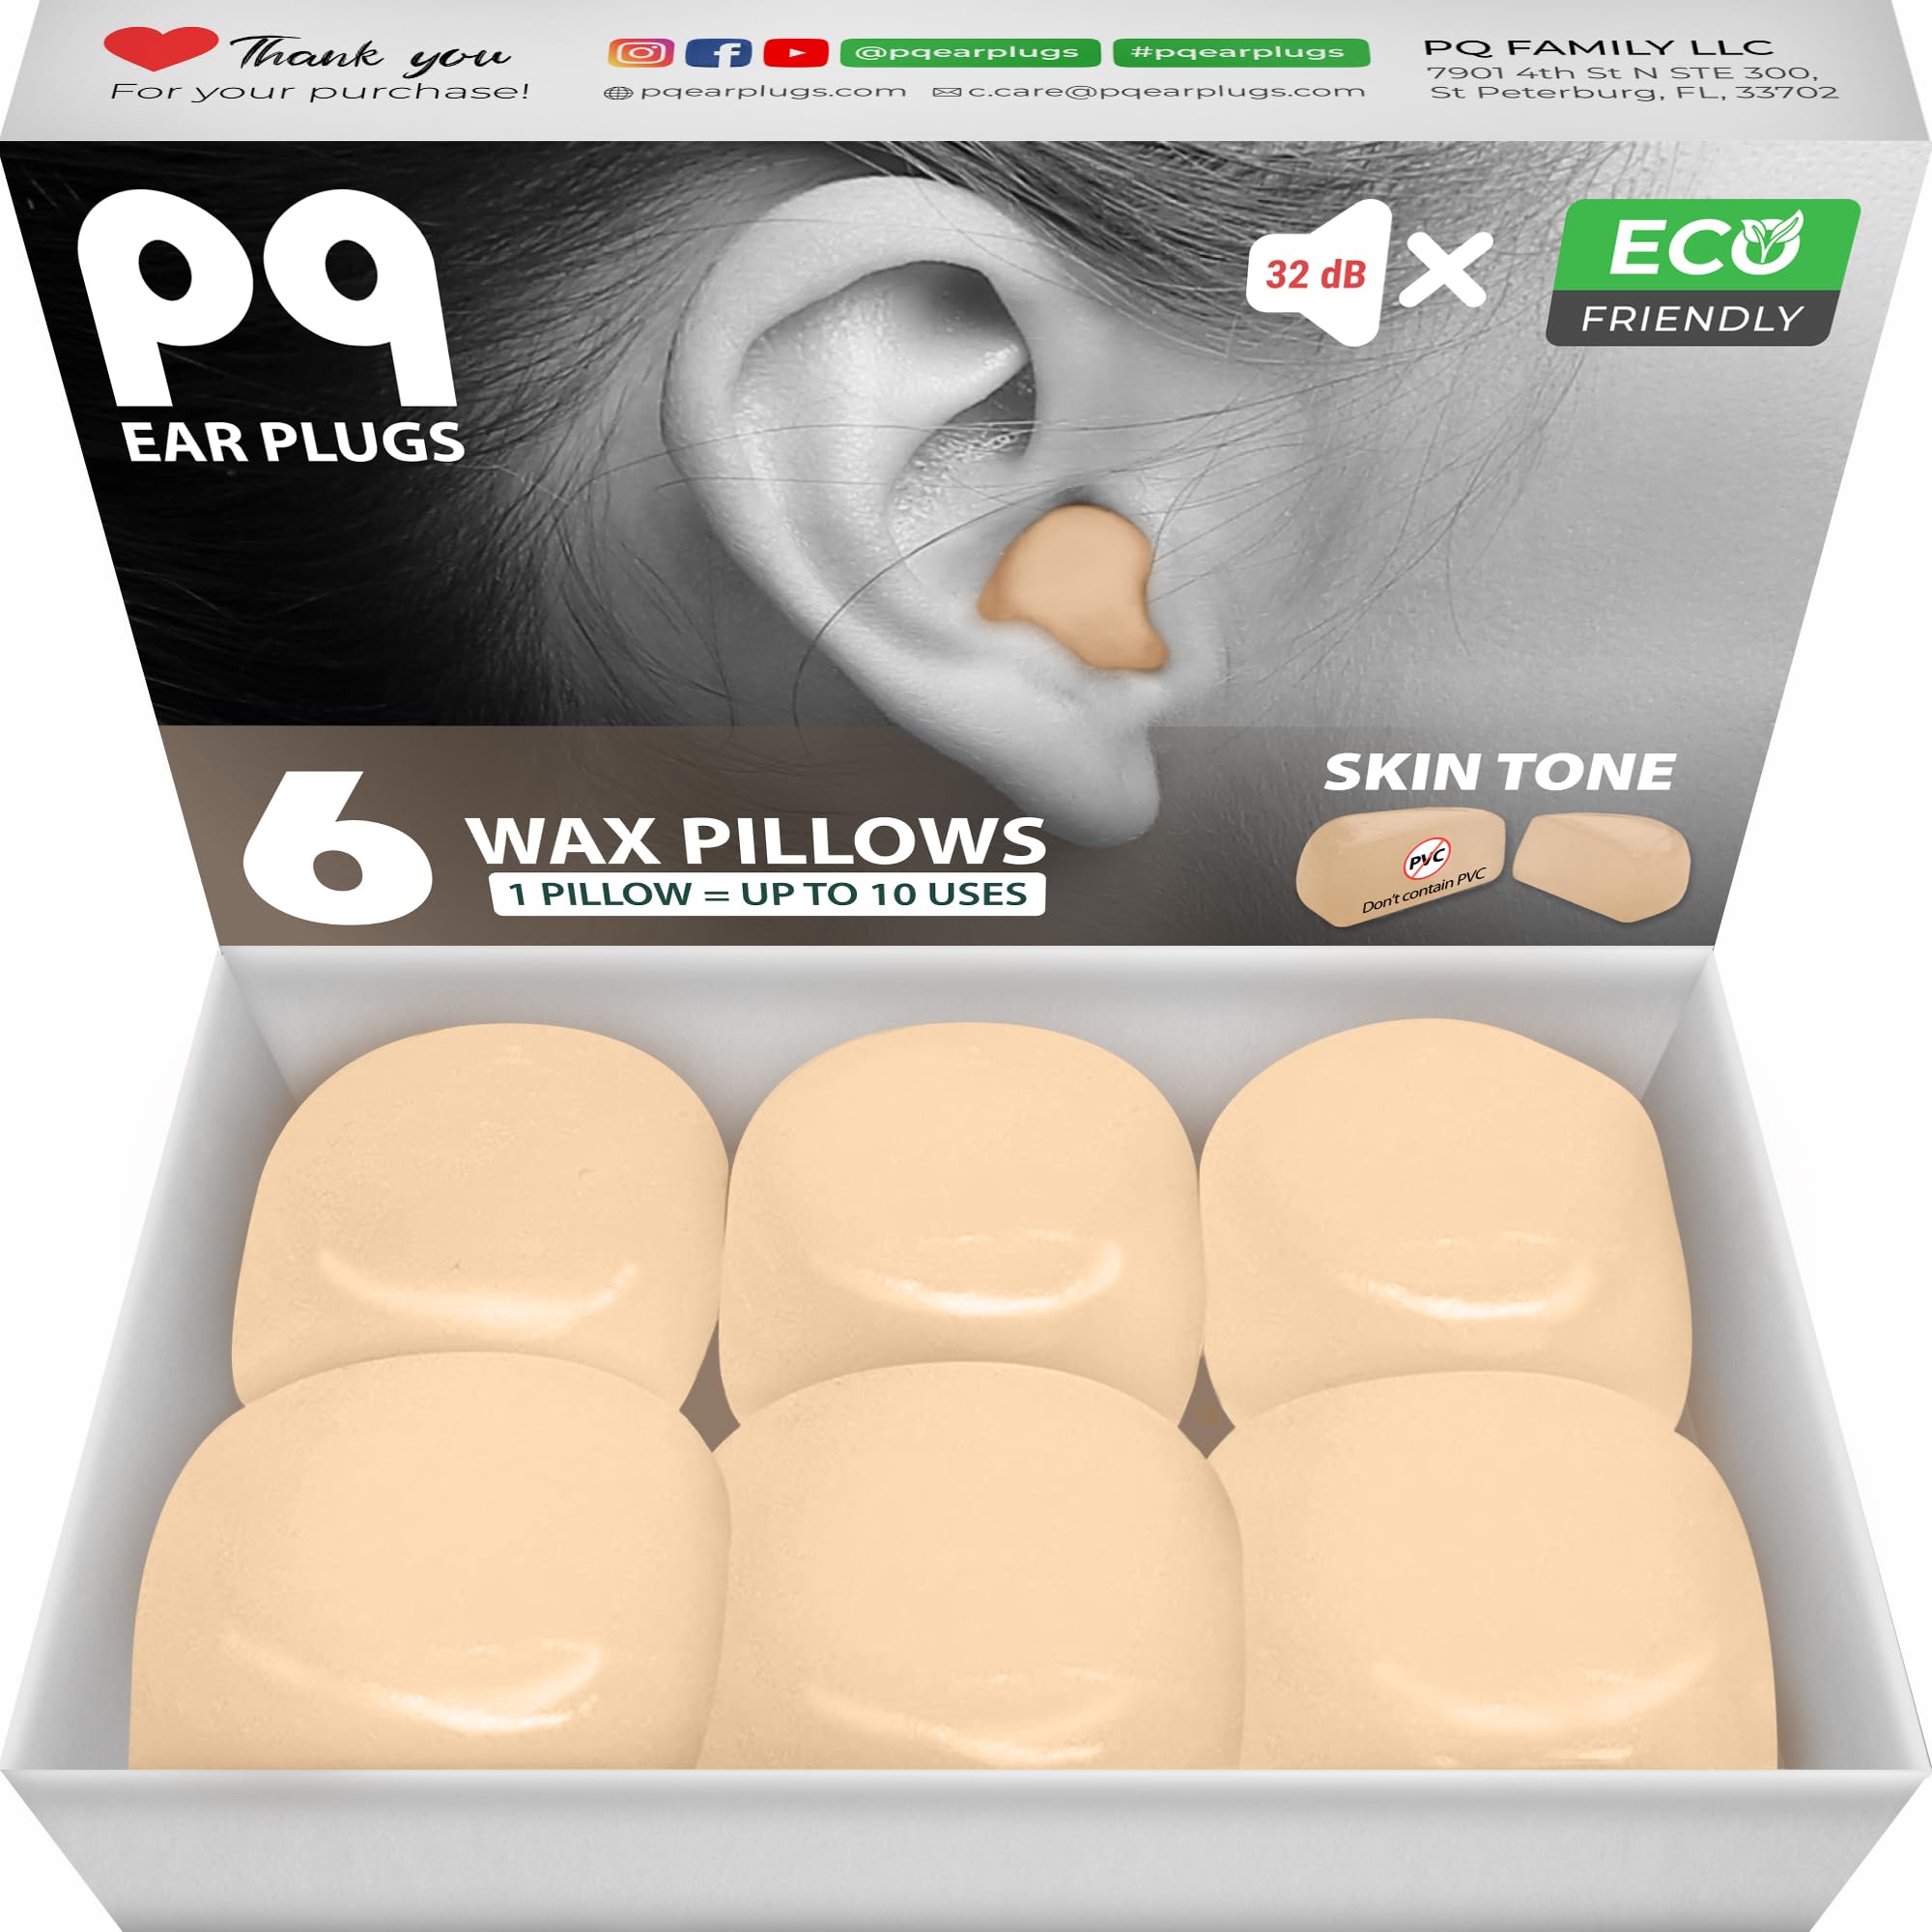 PQ Wax Ear Plugs for Sleep - 6 Beige Silicone Wax Earplugs for Sleeping and Swimming - Gel Ear Plugs for Noise Cancelling, Ear Protection - Sleeping Earplugs with Sound Blocking Level 32Db, 6-Pillows